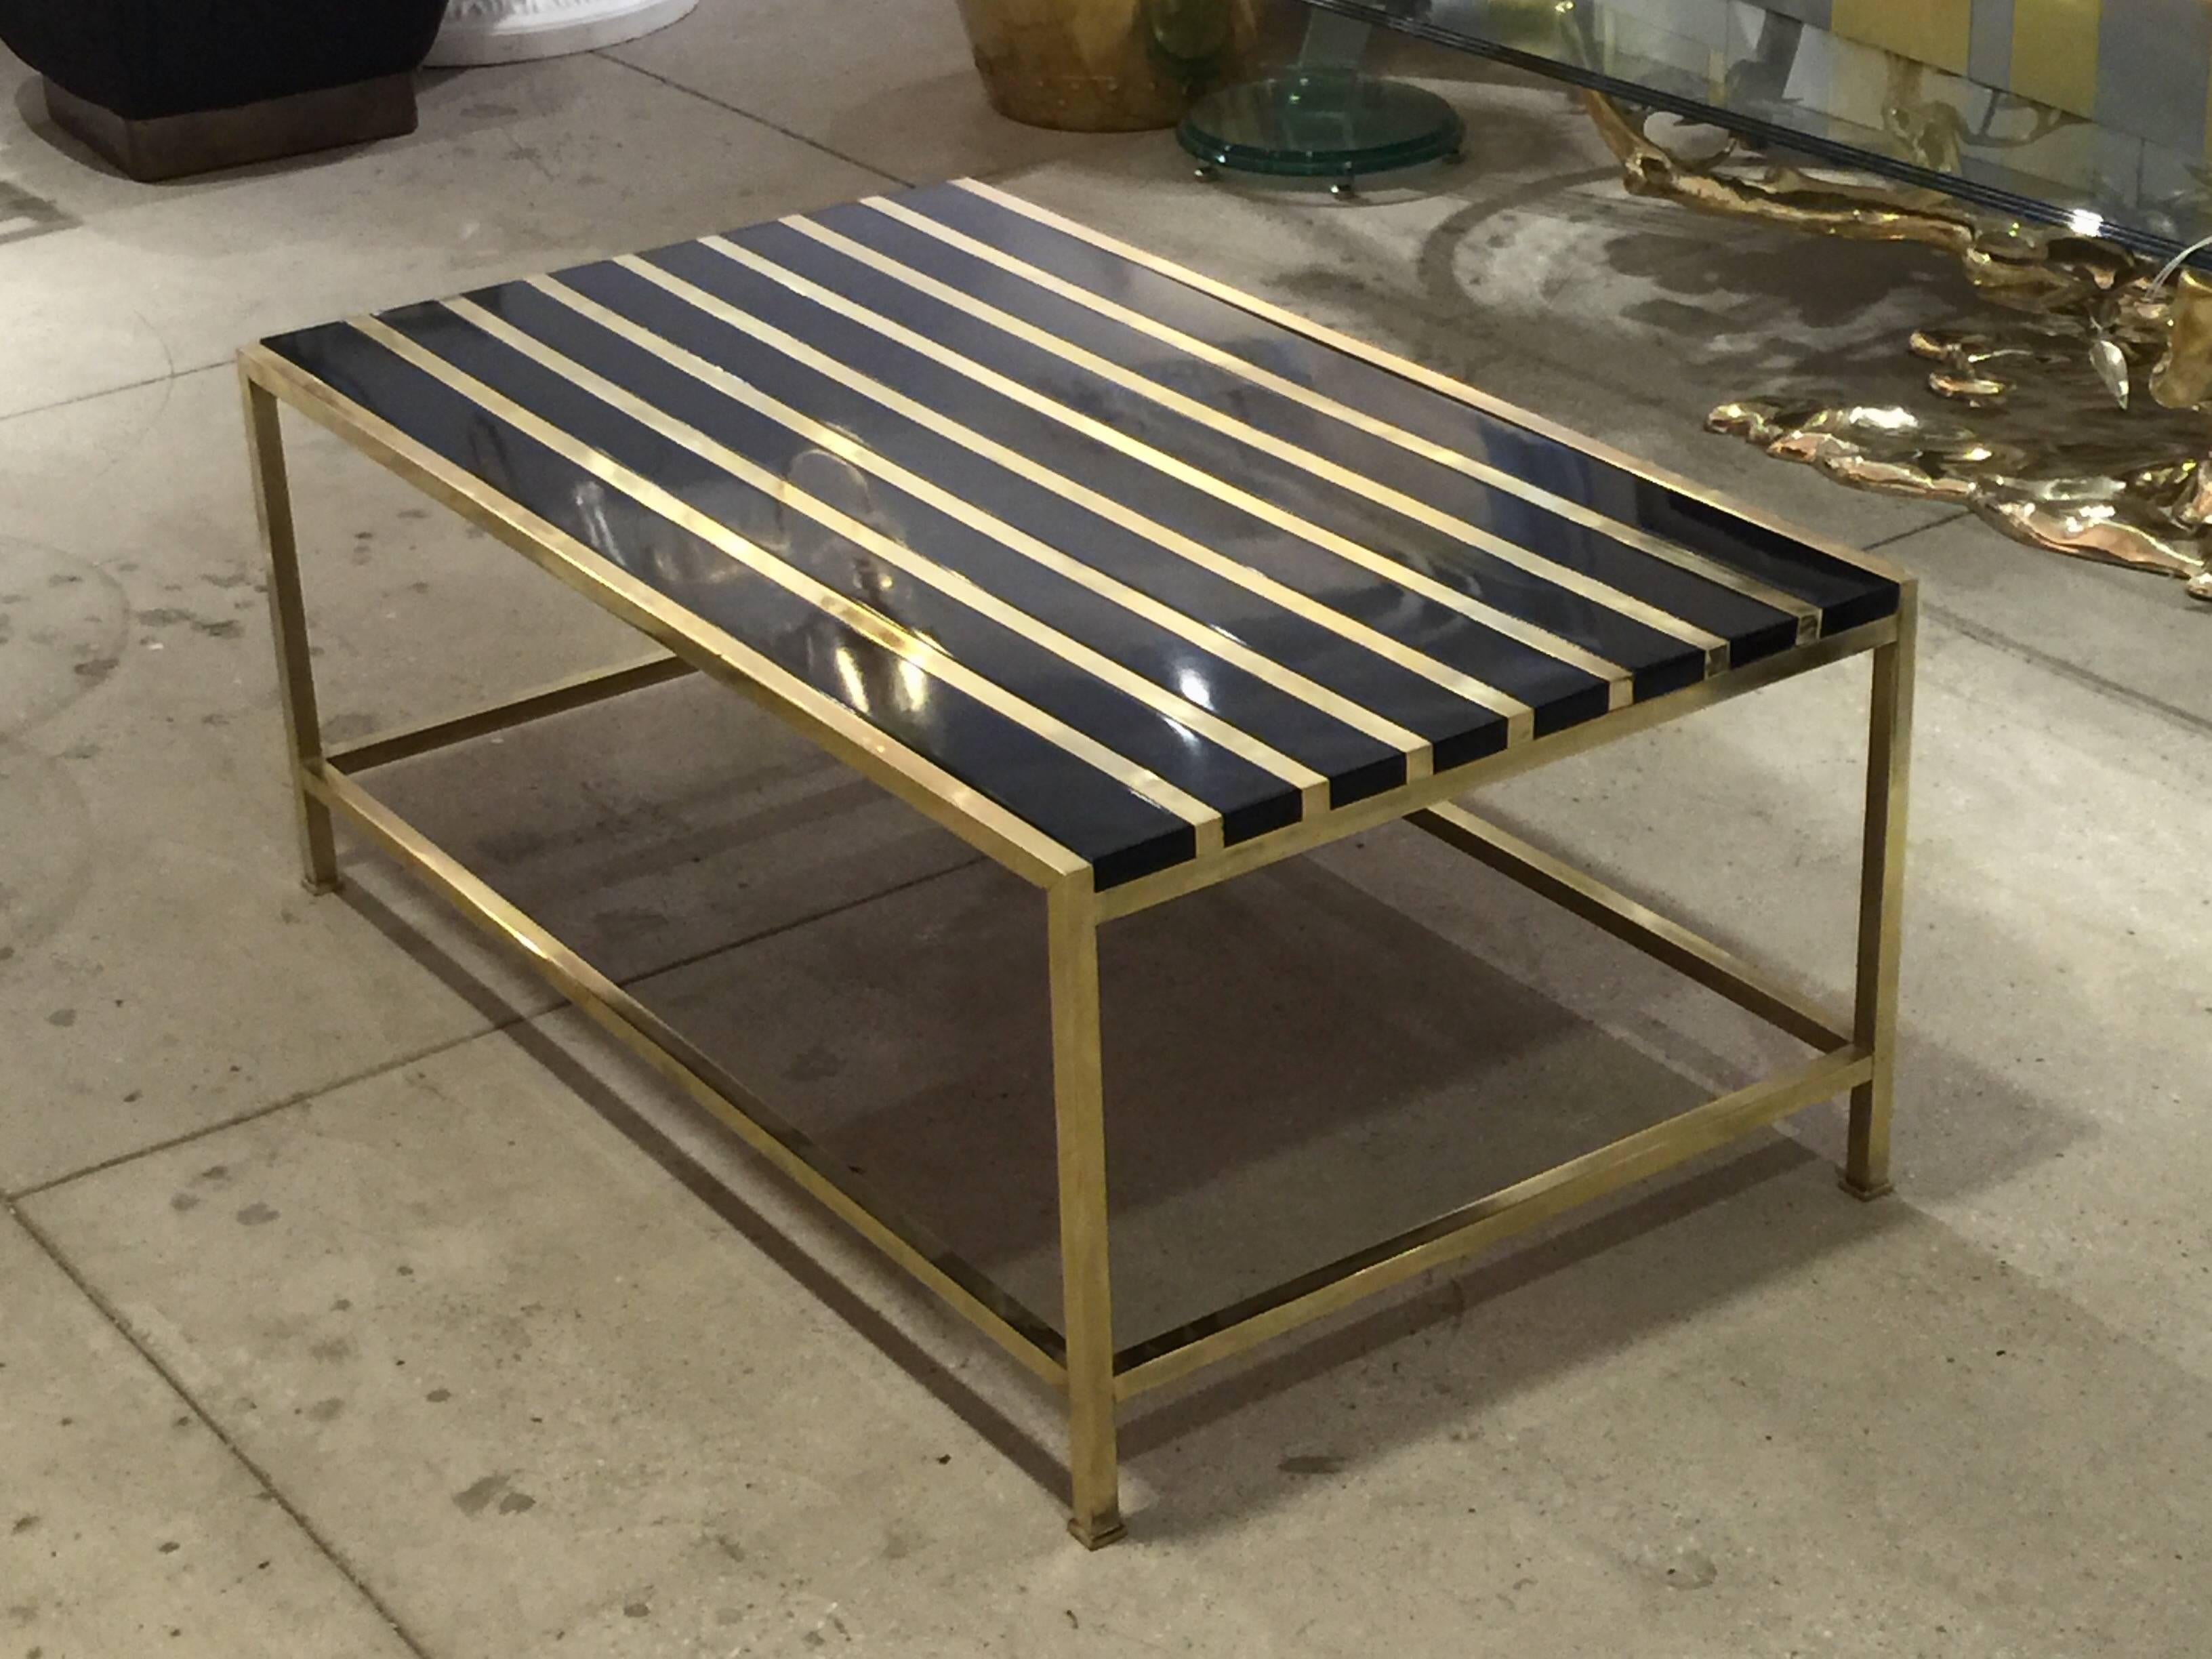 Brass and lacquered wood coffee table.
This table has a custom crafted top which floats atop this Mid-Century brass base.
Simple clean lines with an elegant chic twist. Base is vintage, 
circa 1960s.